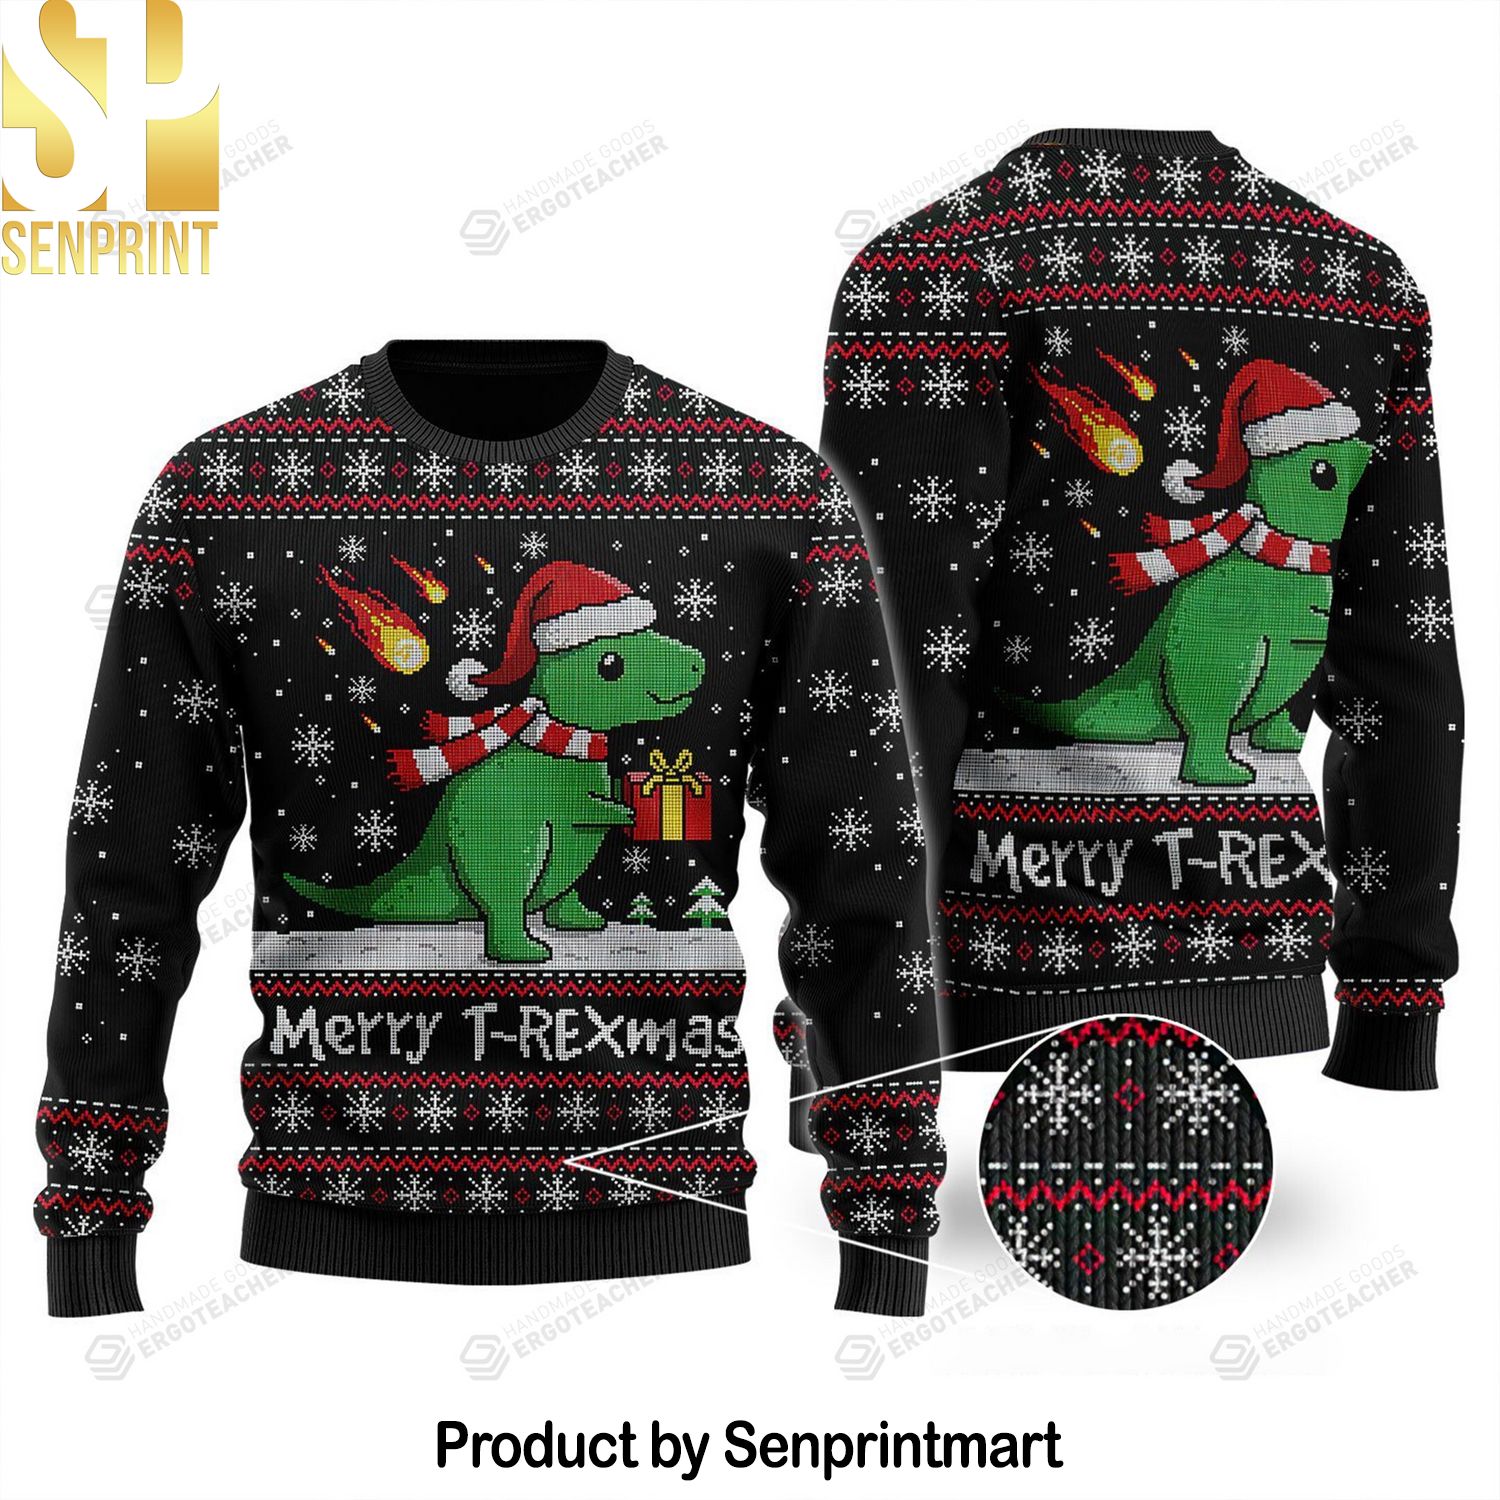 Merry T-Rexmas Ugly Christmas Holiday Sweater